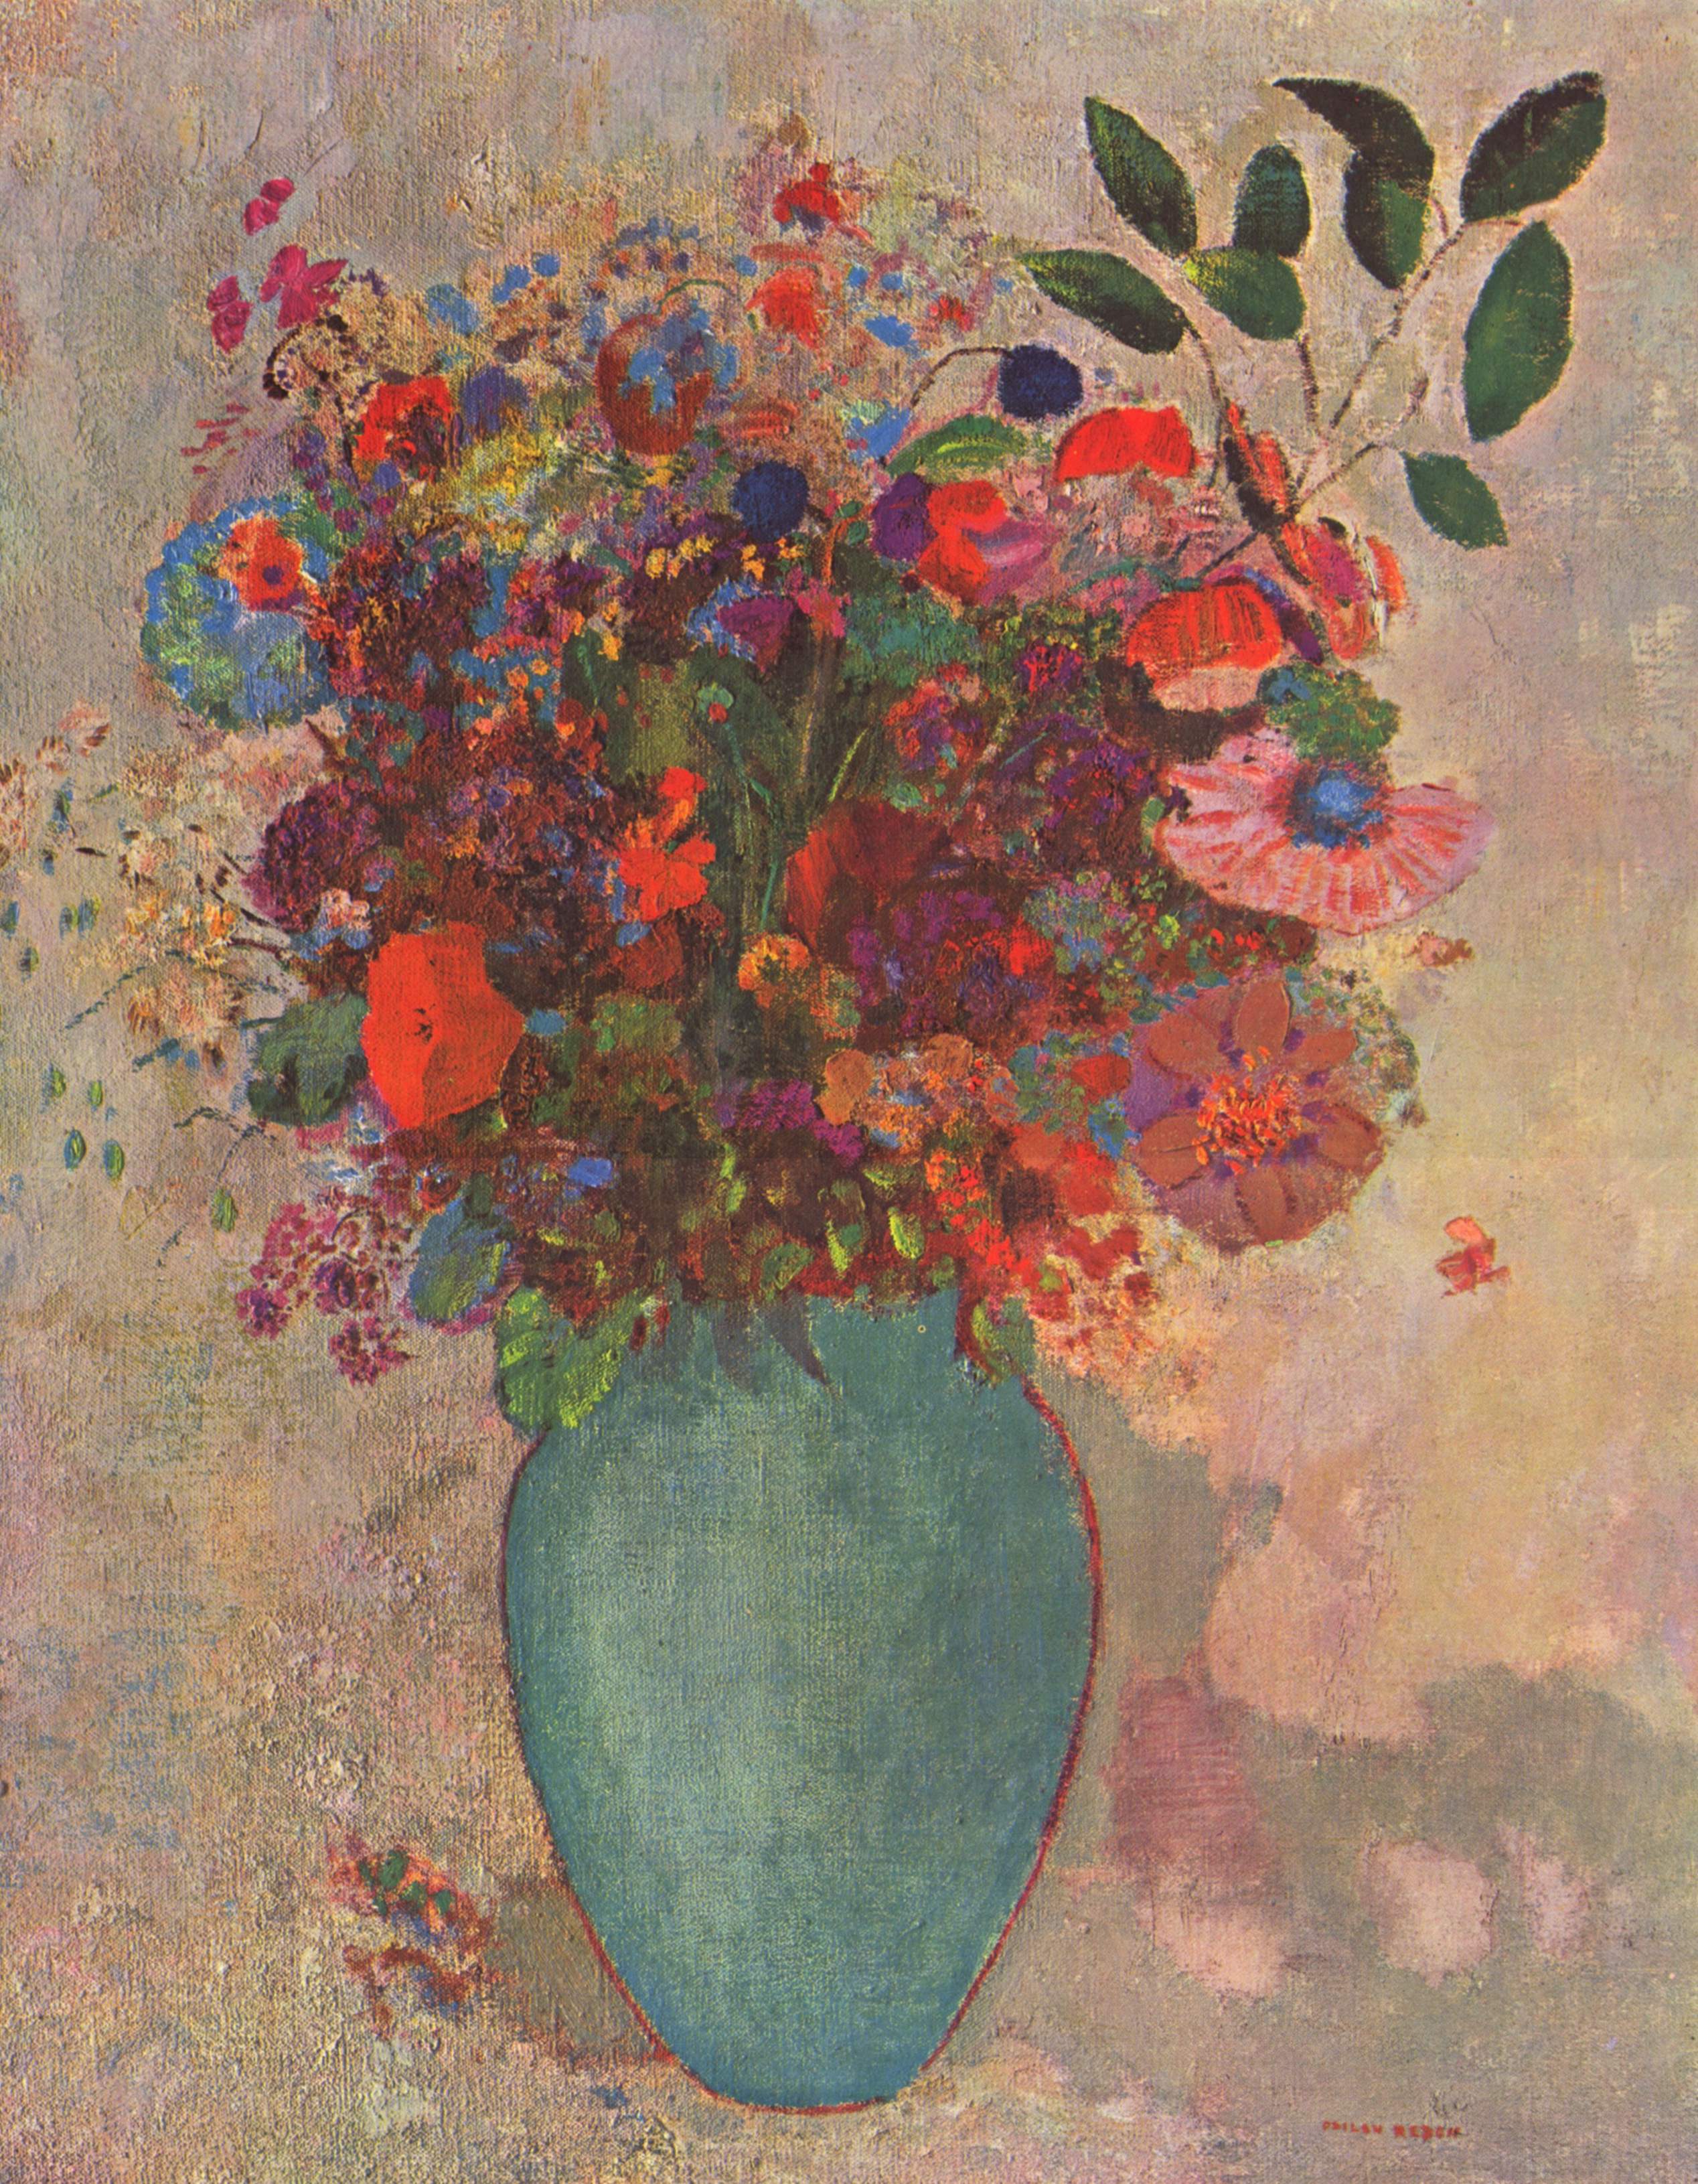 The Turquoise Vase by Odilon Redon